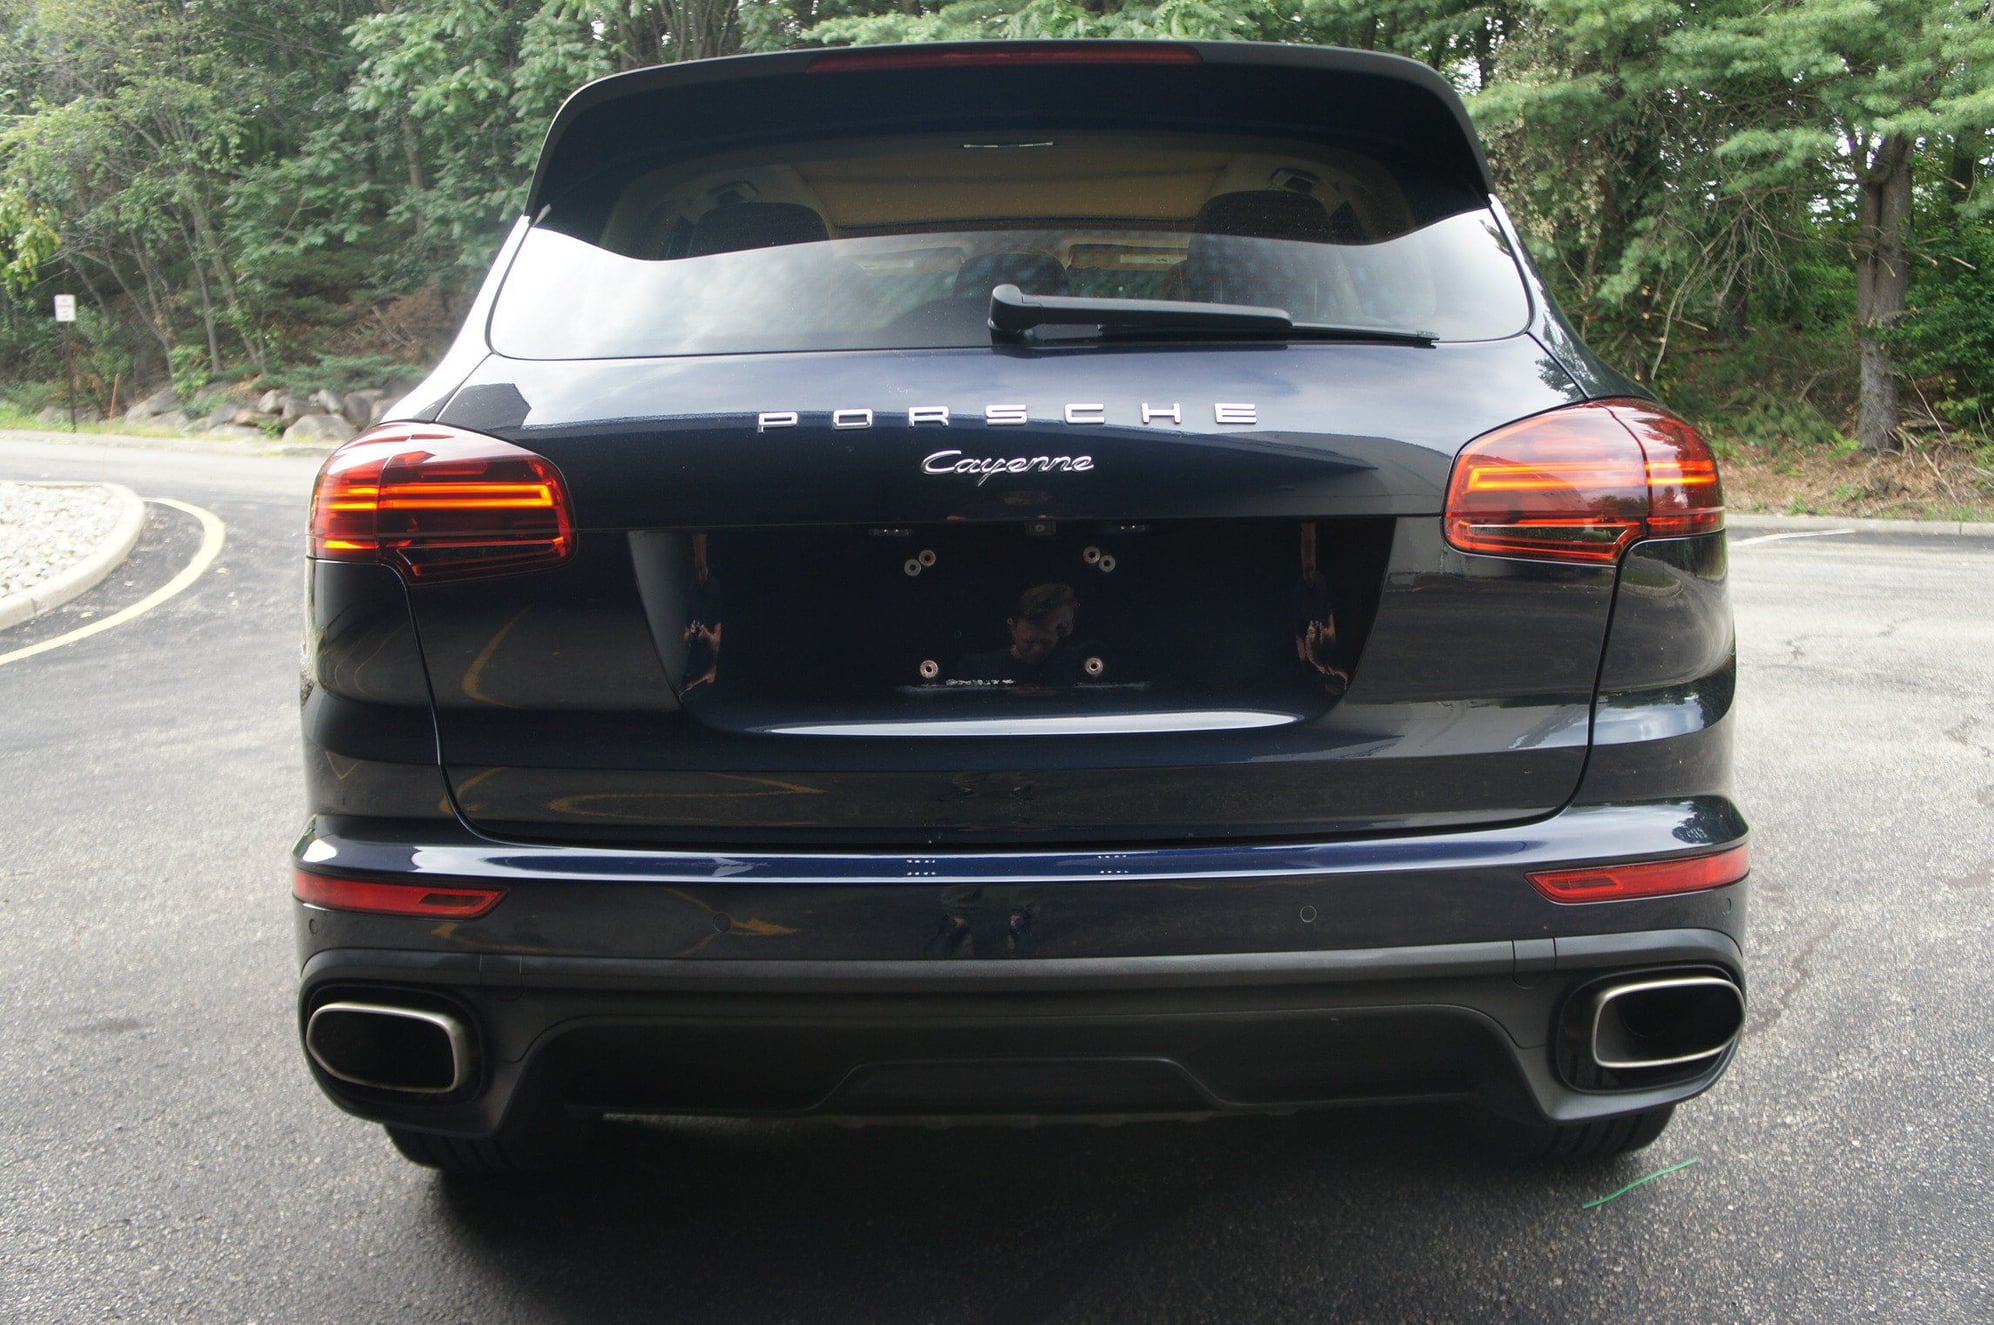 2016 Porsche Cayenne - 2016 PORSCHE CAYENNE DIESEL AWD Not Converted Emission None in the Country!! MSRP $72 - Used - VIN 00000000000000000 - 95,375 Miles - 6 cyl - AWD - Automatic - SUV - Blue - Parsippany, NJ 07054, United States